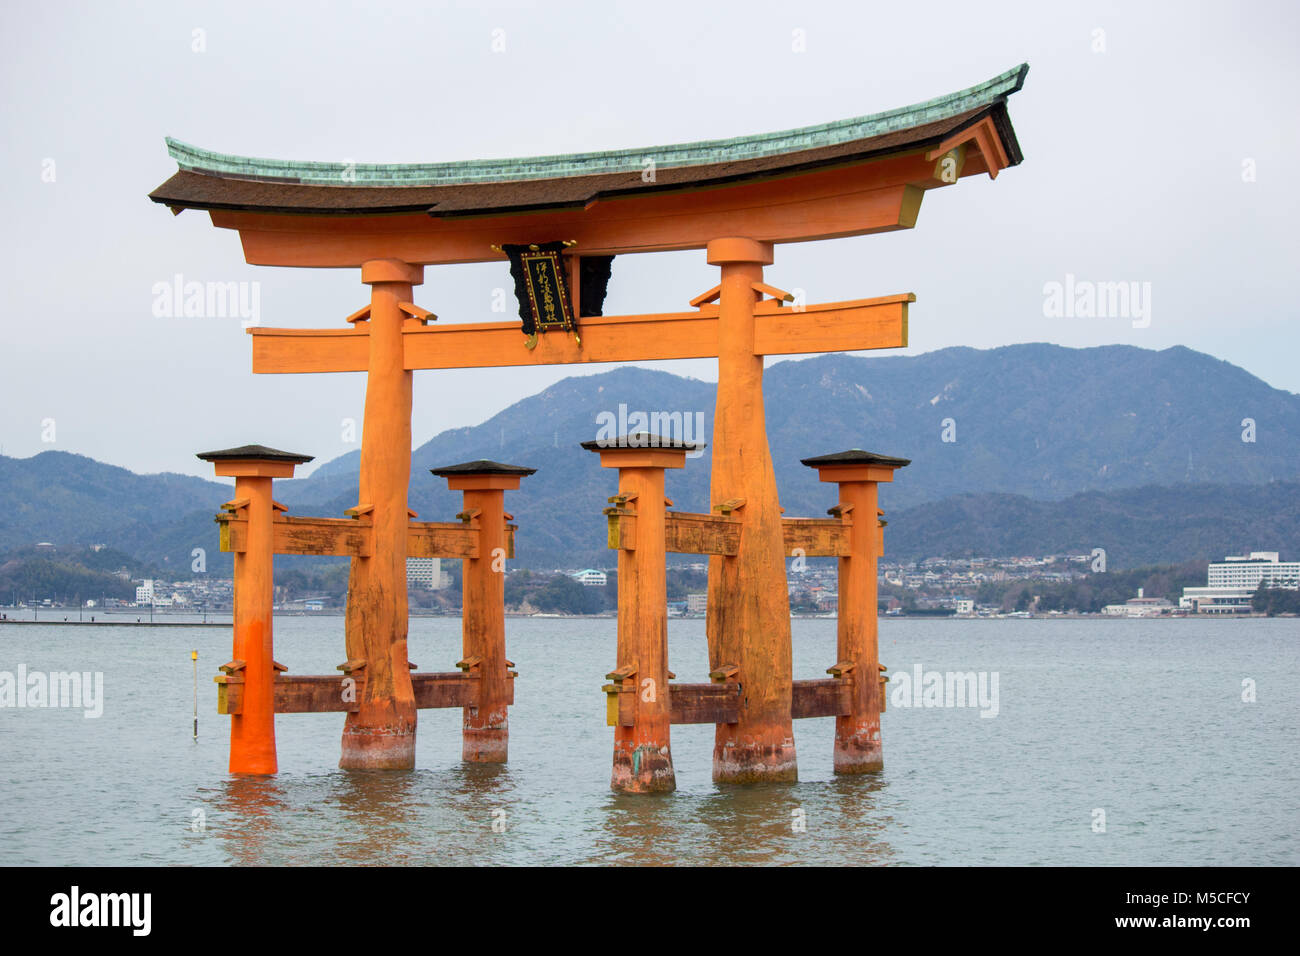 Itsukushima, also known as Miyajima, is a small island in Hiroshima Bay.Just offshore is the giant, orange Great Torii Gate. Stock Photo